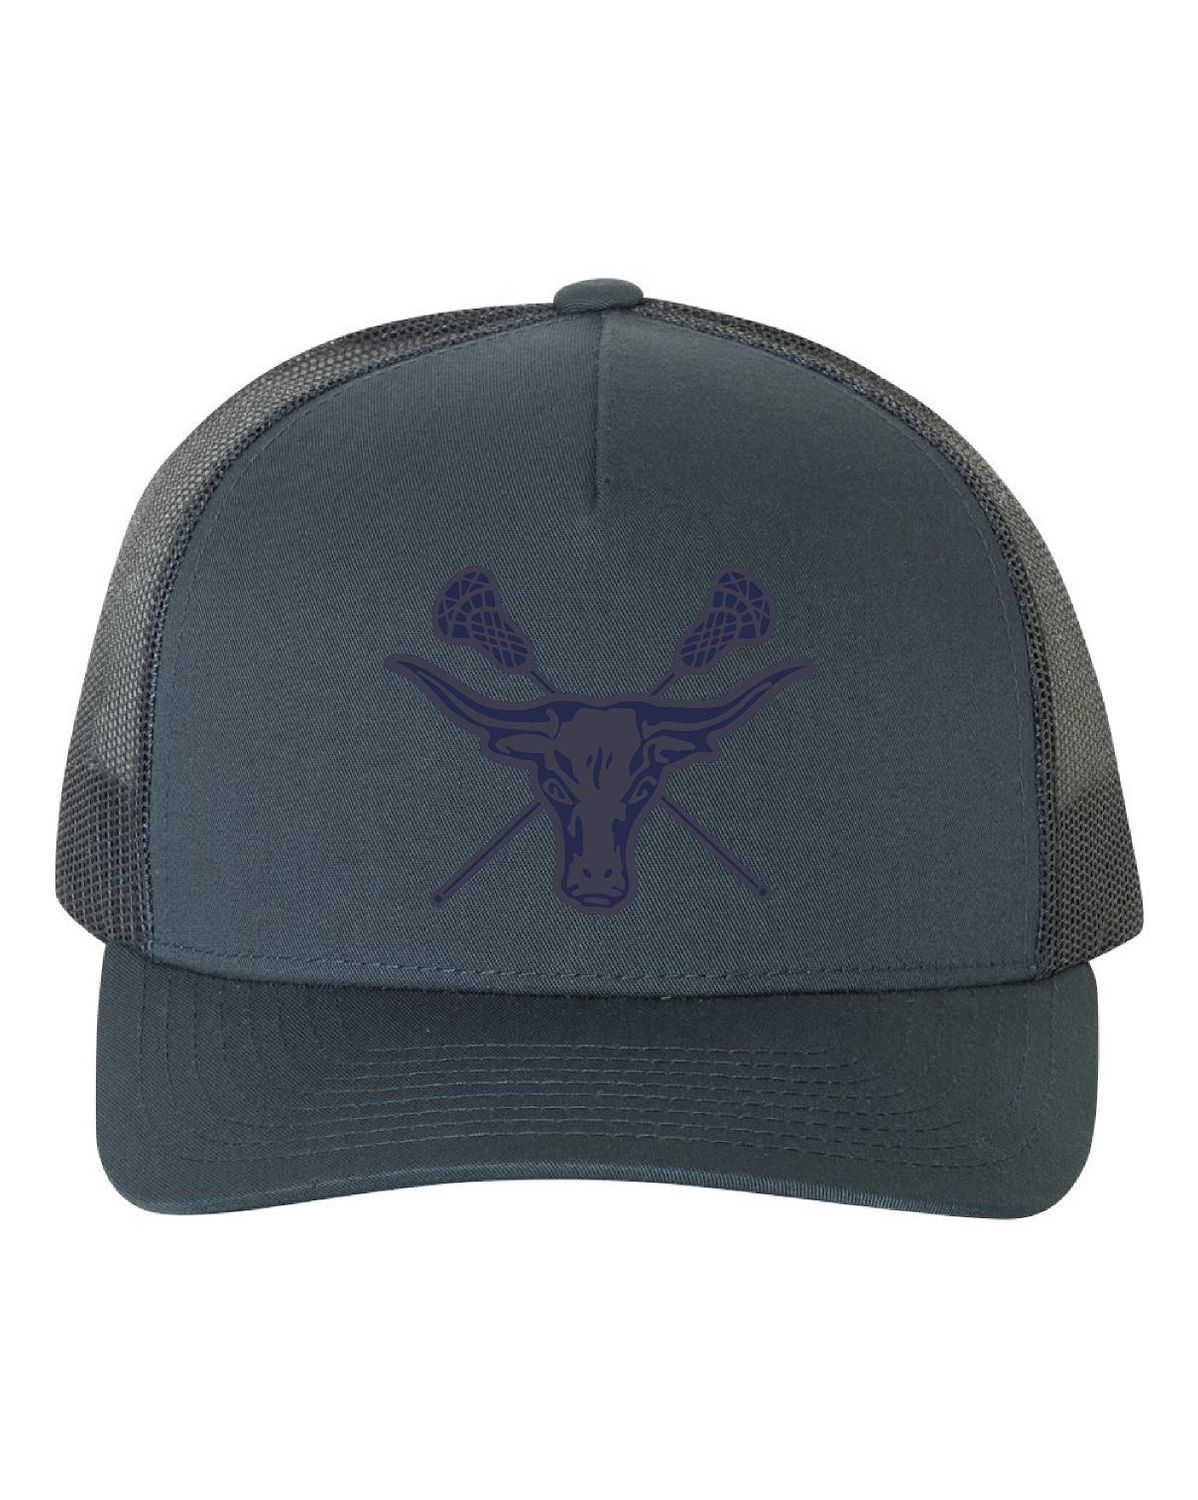 Subdued Snapback Adjustable 5 Panel Mesh Back Cap W/ Embroidered Peabody High School Girls Lacrosse